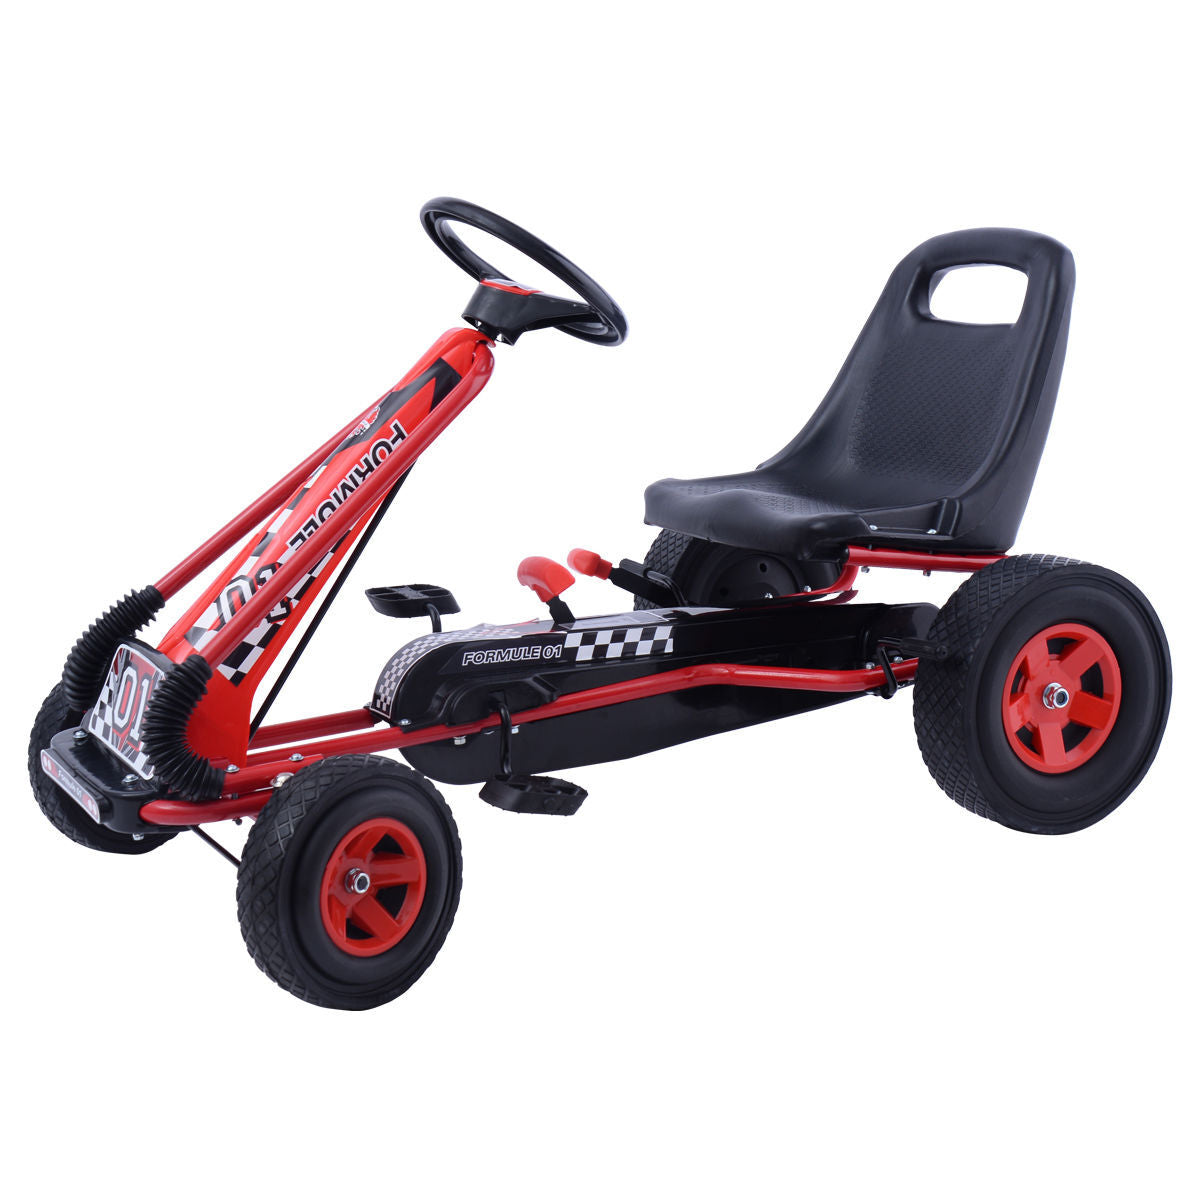 4-Wheel Kids Ride-On Pedal-Powered Bike Go Kart Racer Car - Outdoor Play Toy